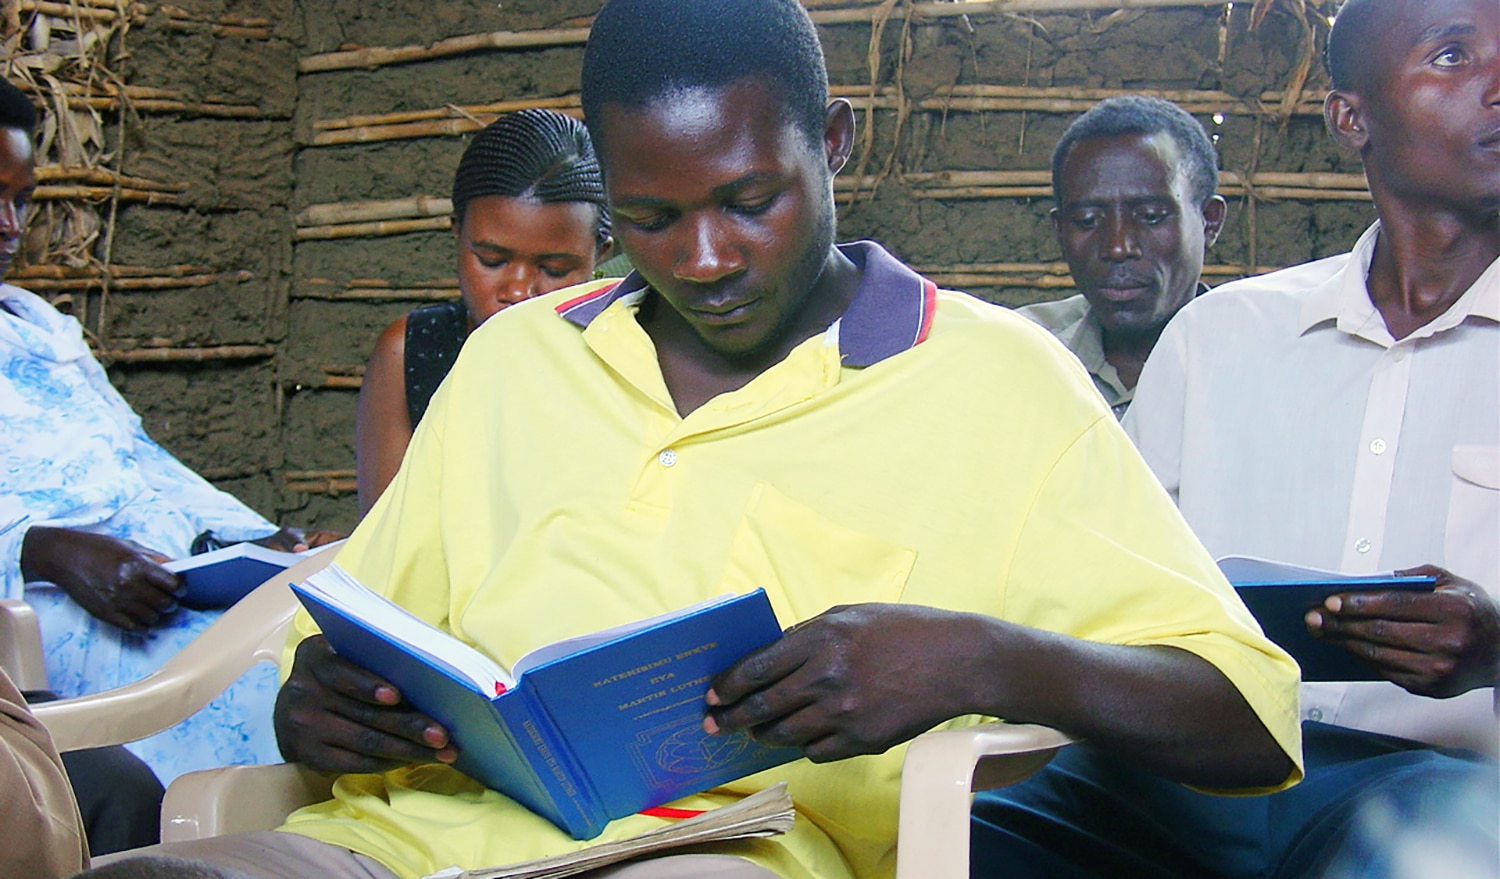 Uganda Young Man Studying Luther's Small Catechism